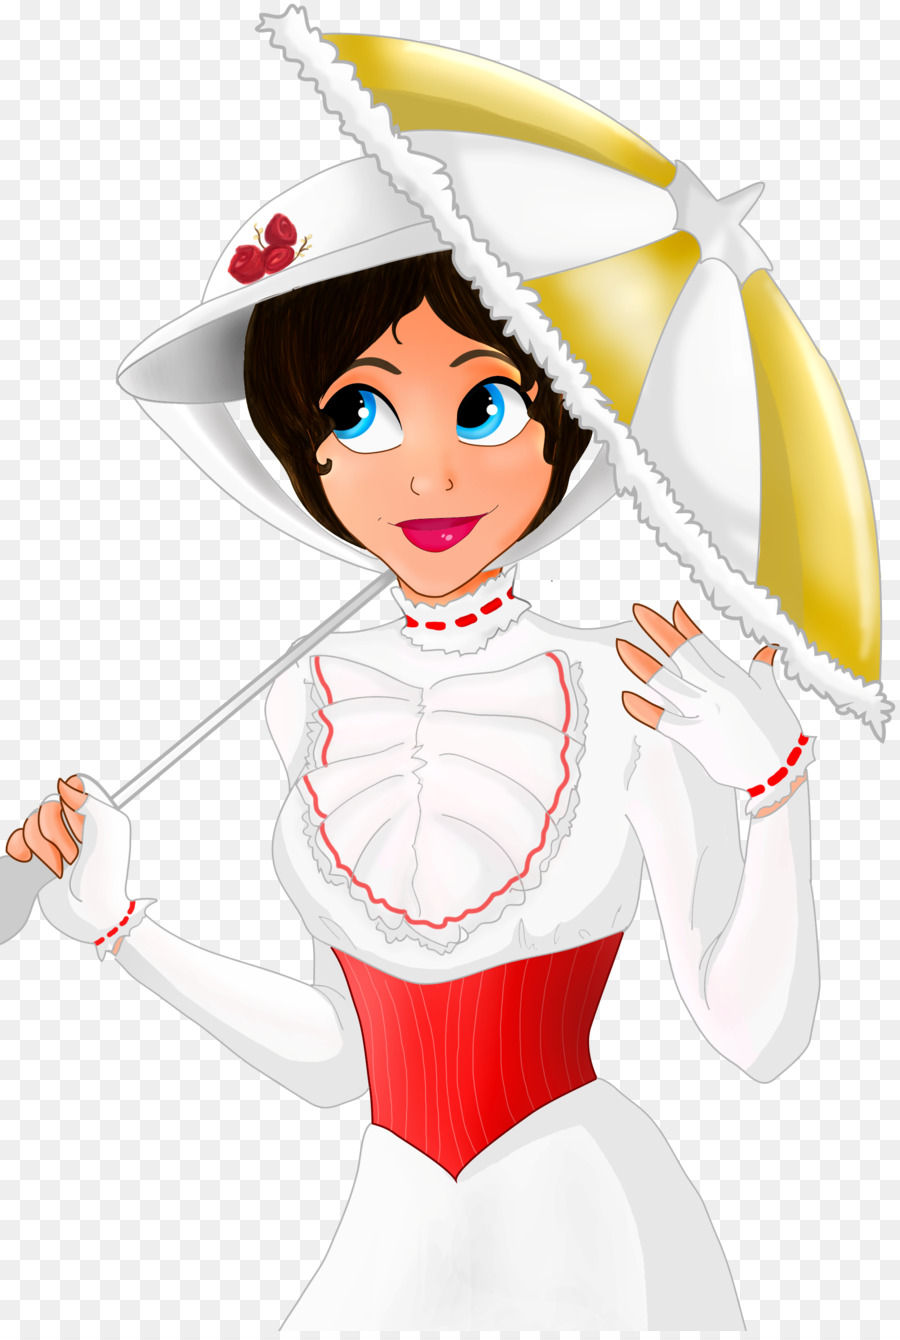 Mary Poppins Cartoon Drawing DeviantArt Clip art - Mary png download - 900*1331 - Free Transparent  png Download.